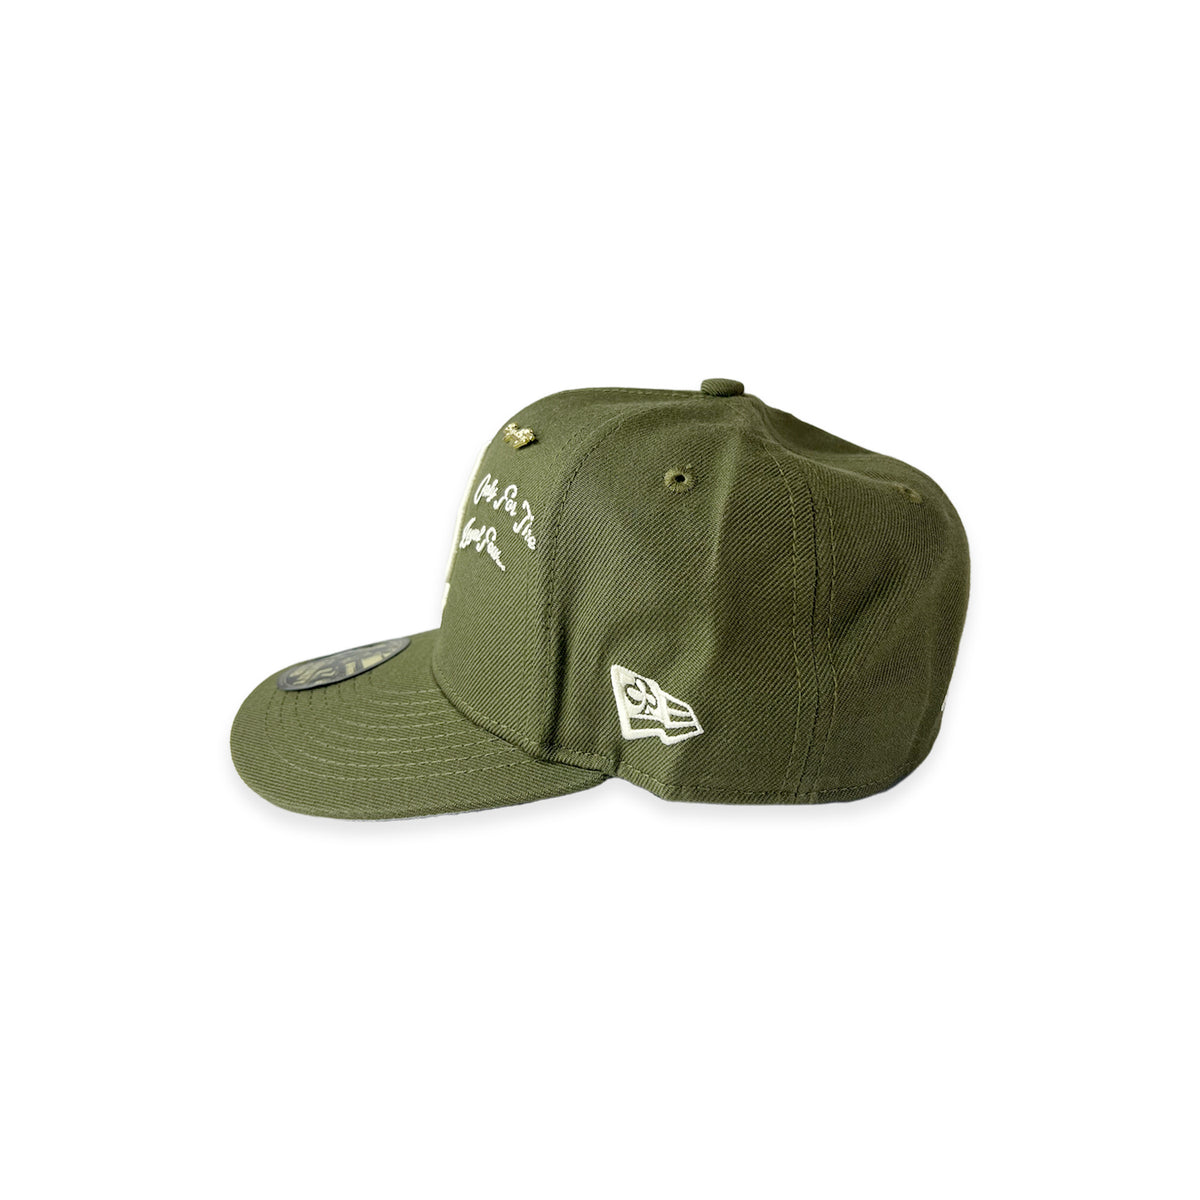 ♣️® LOGO FITTED (OLIVE GREEN) – The Loyalty Club